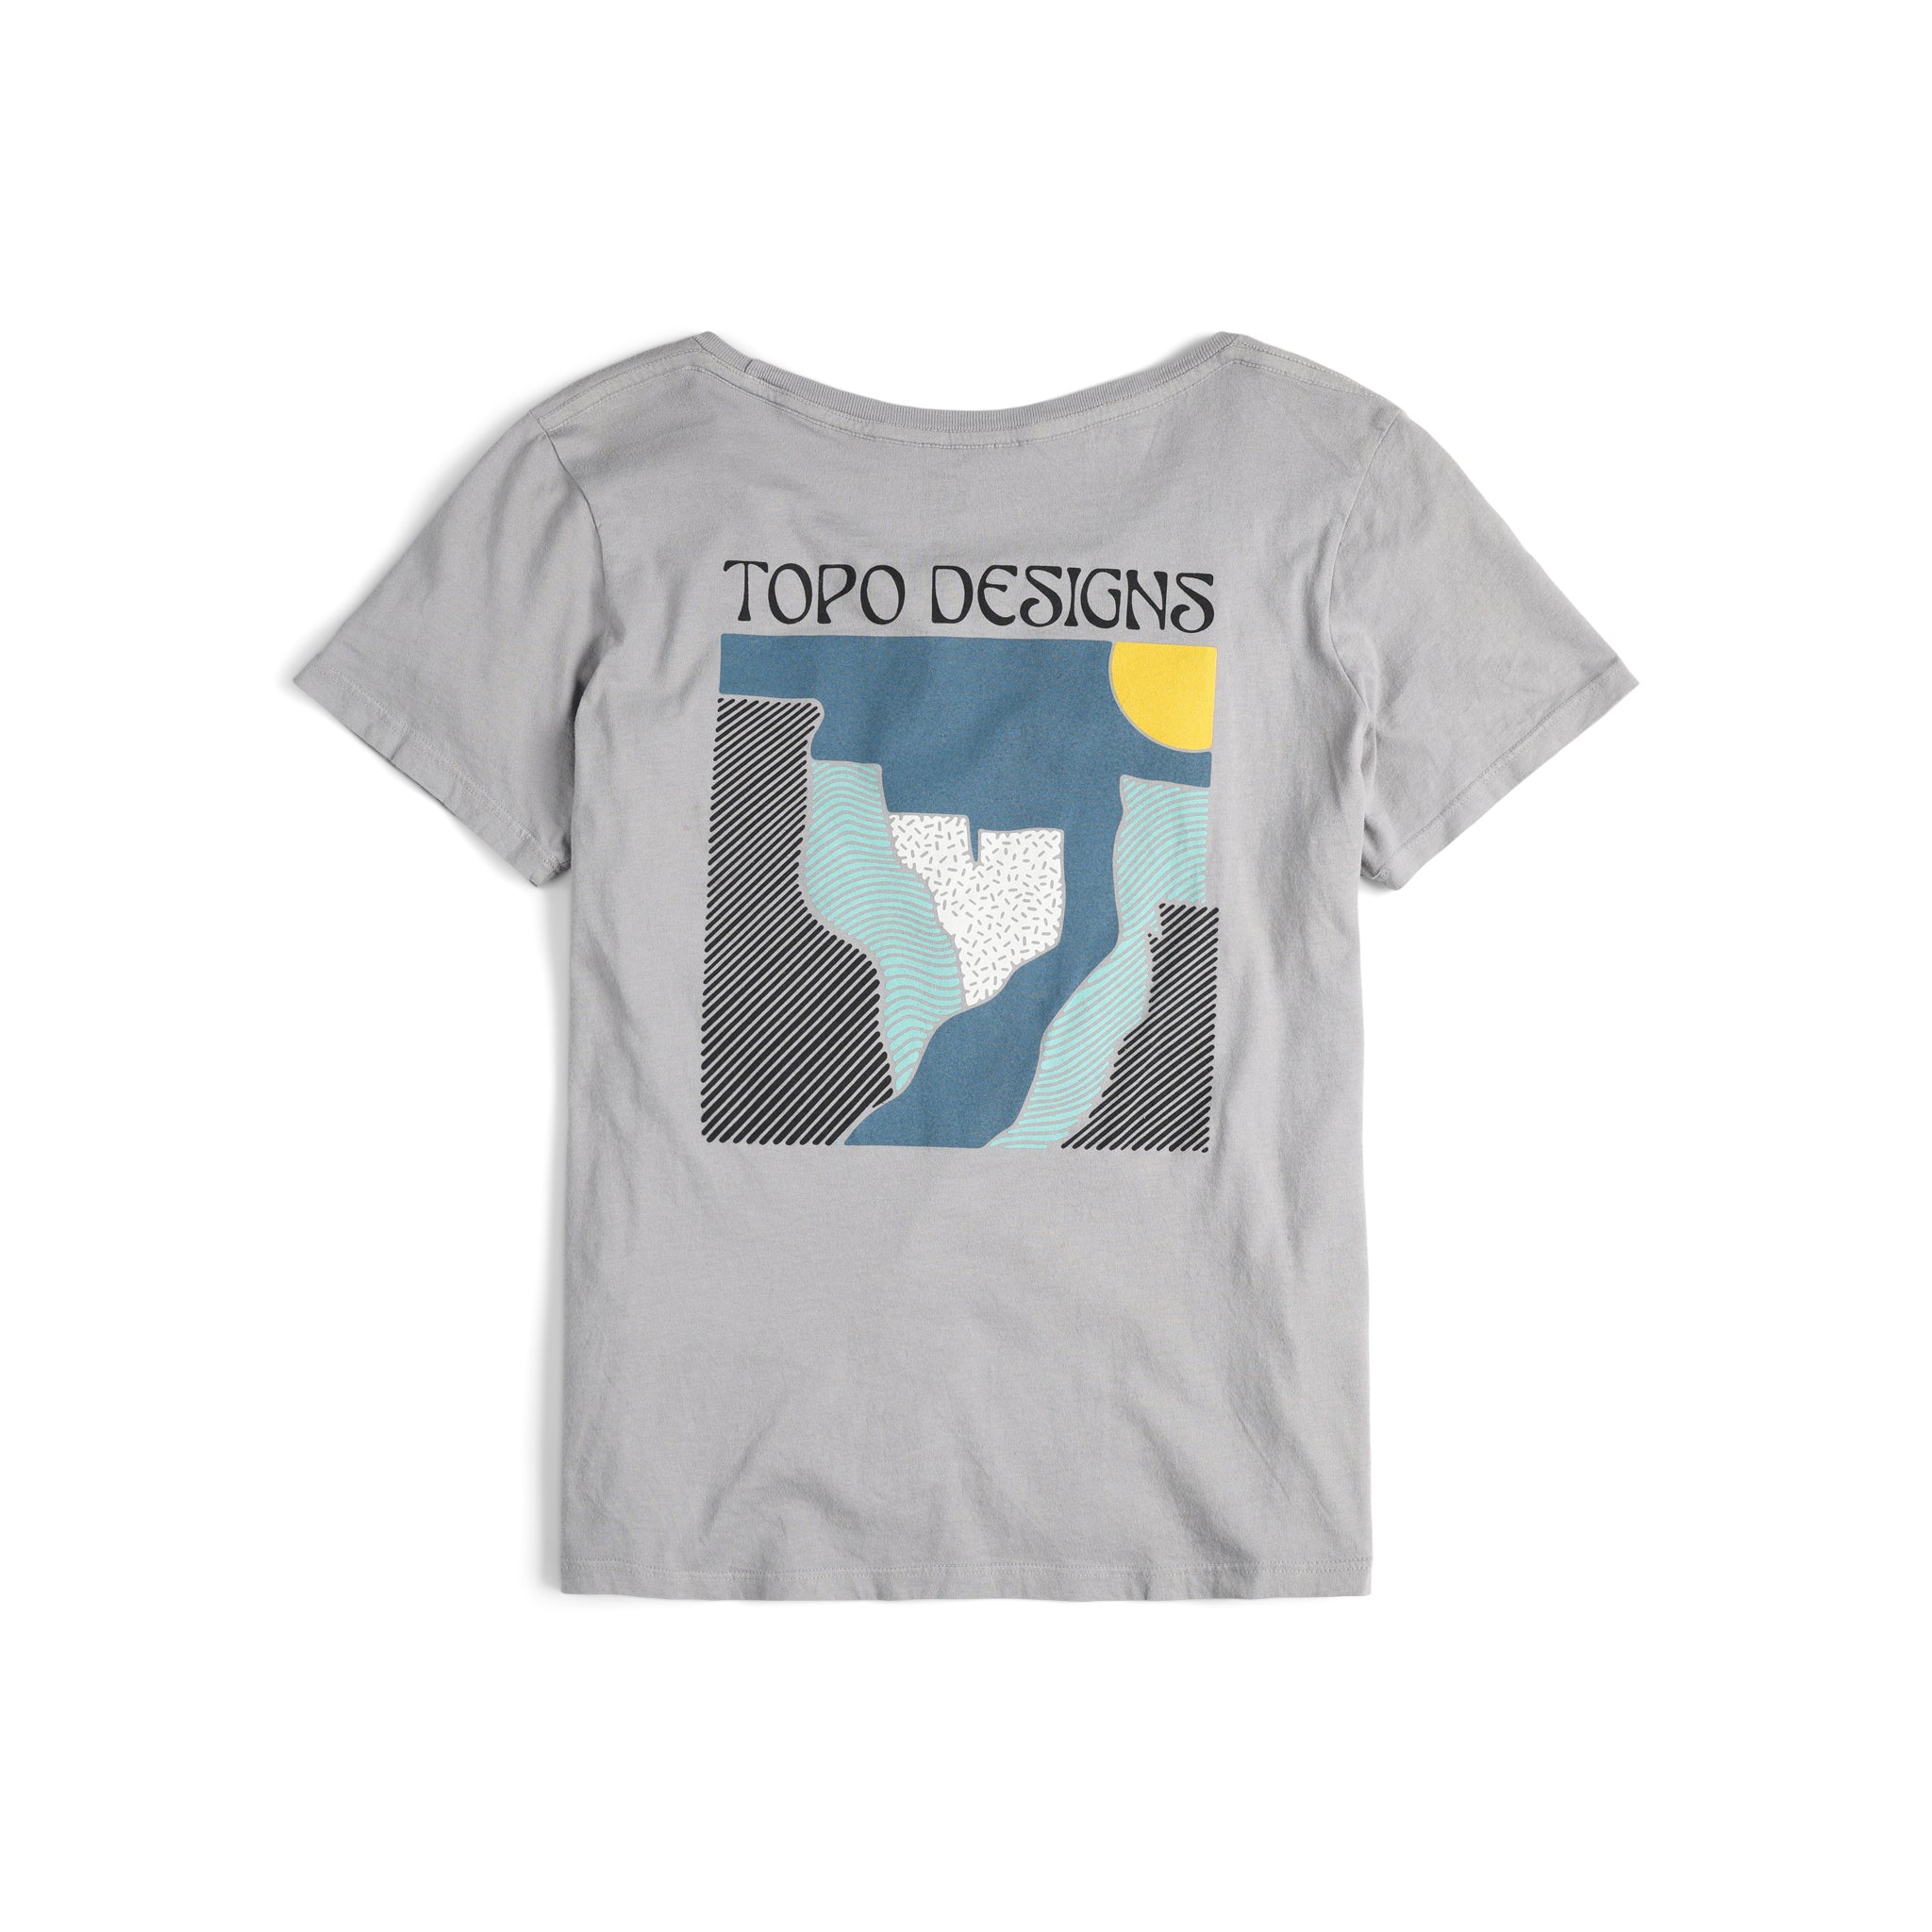 Back view of Topo Designs Women's Canyons Tee 100% organic cotton short sleeve graphic logo t-shirt in "gray".